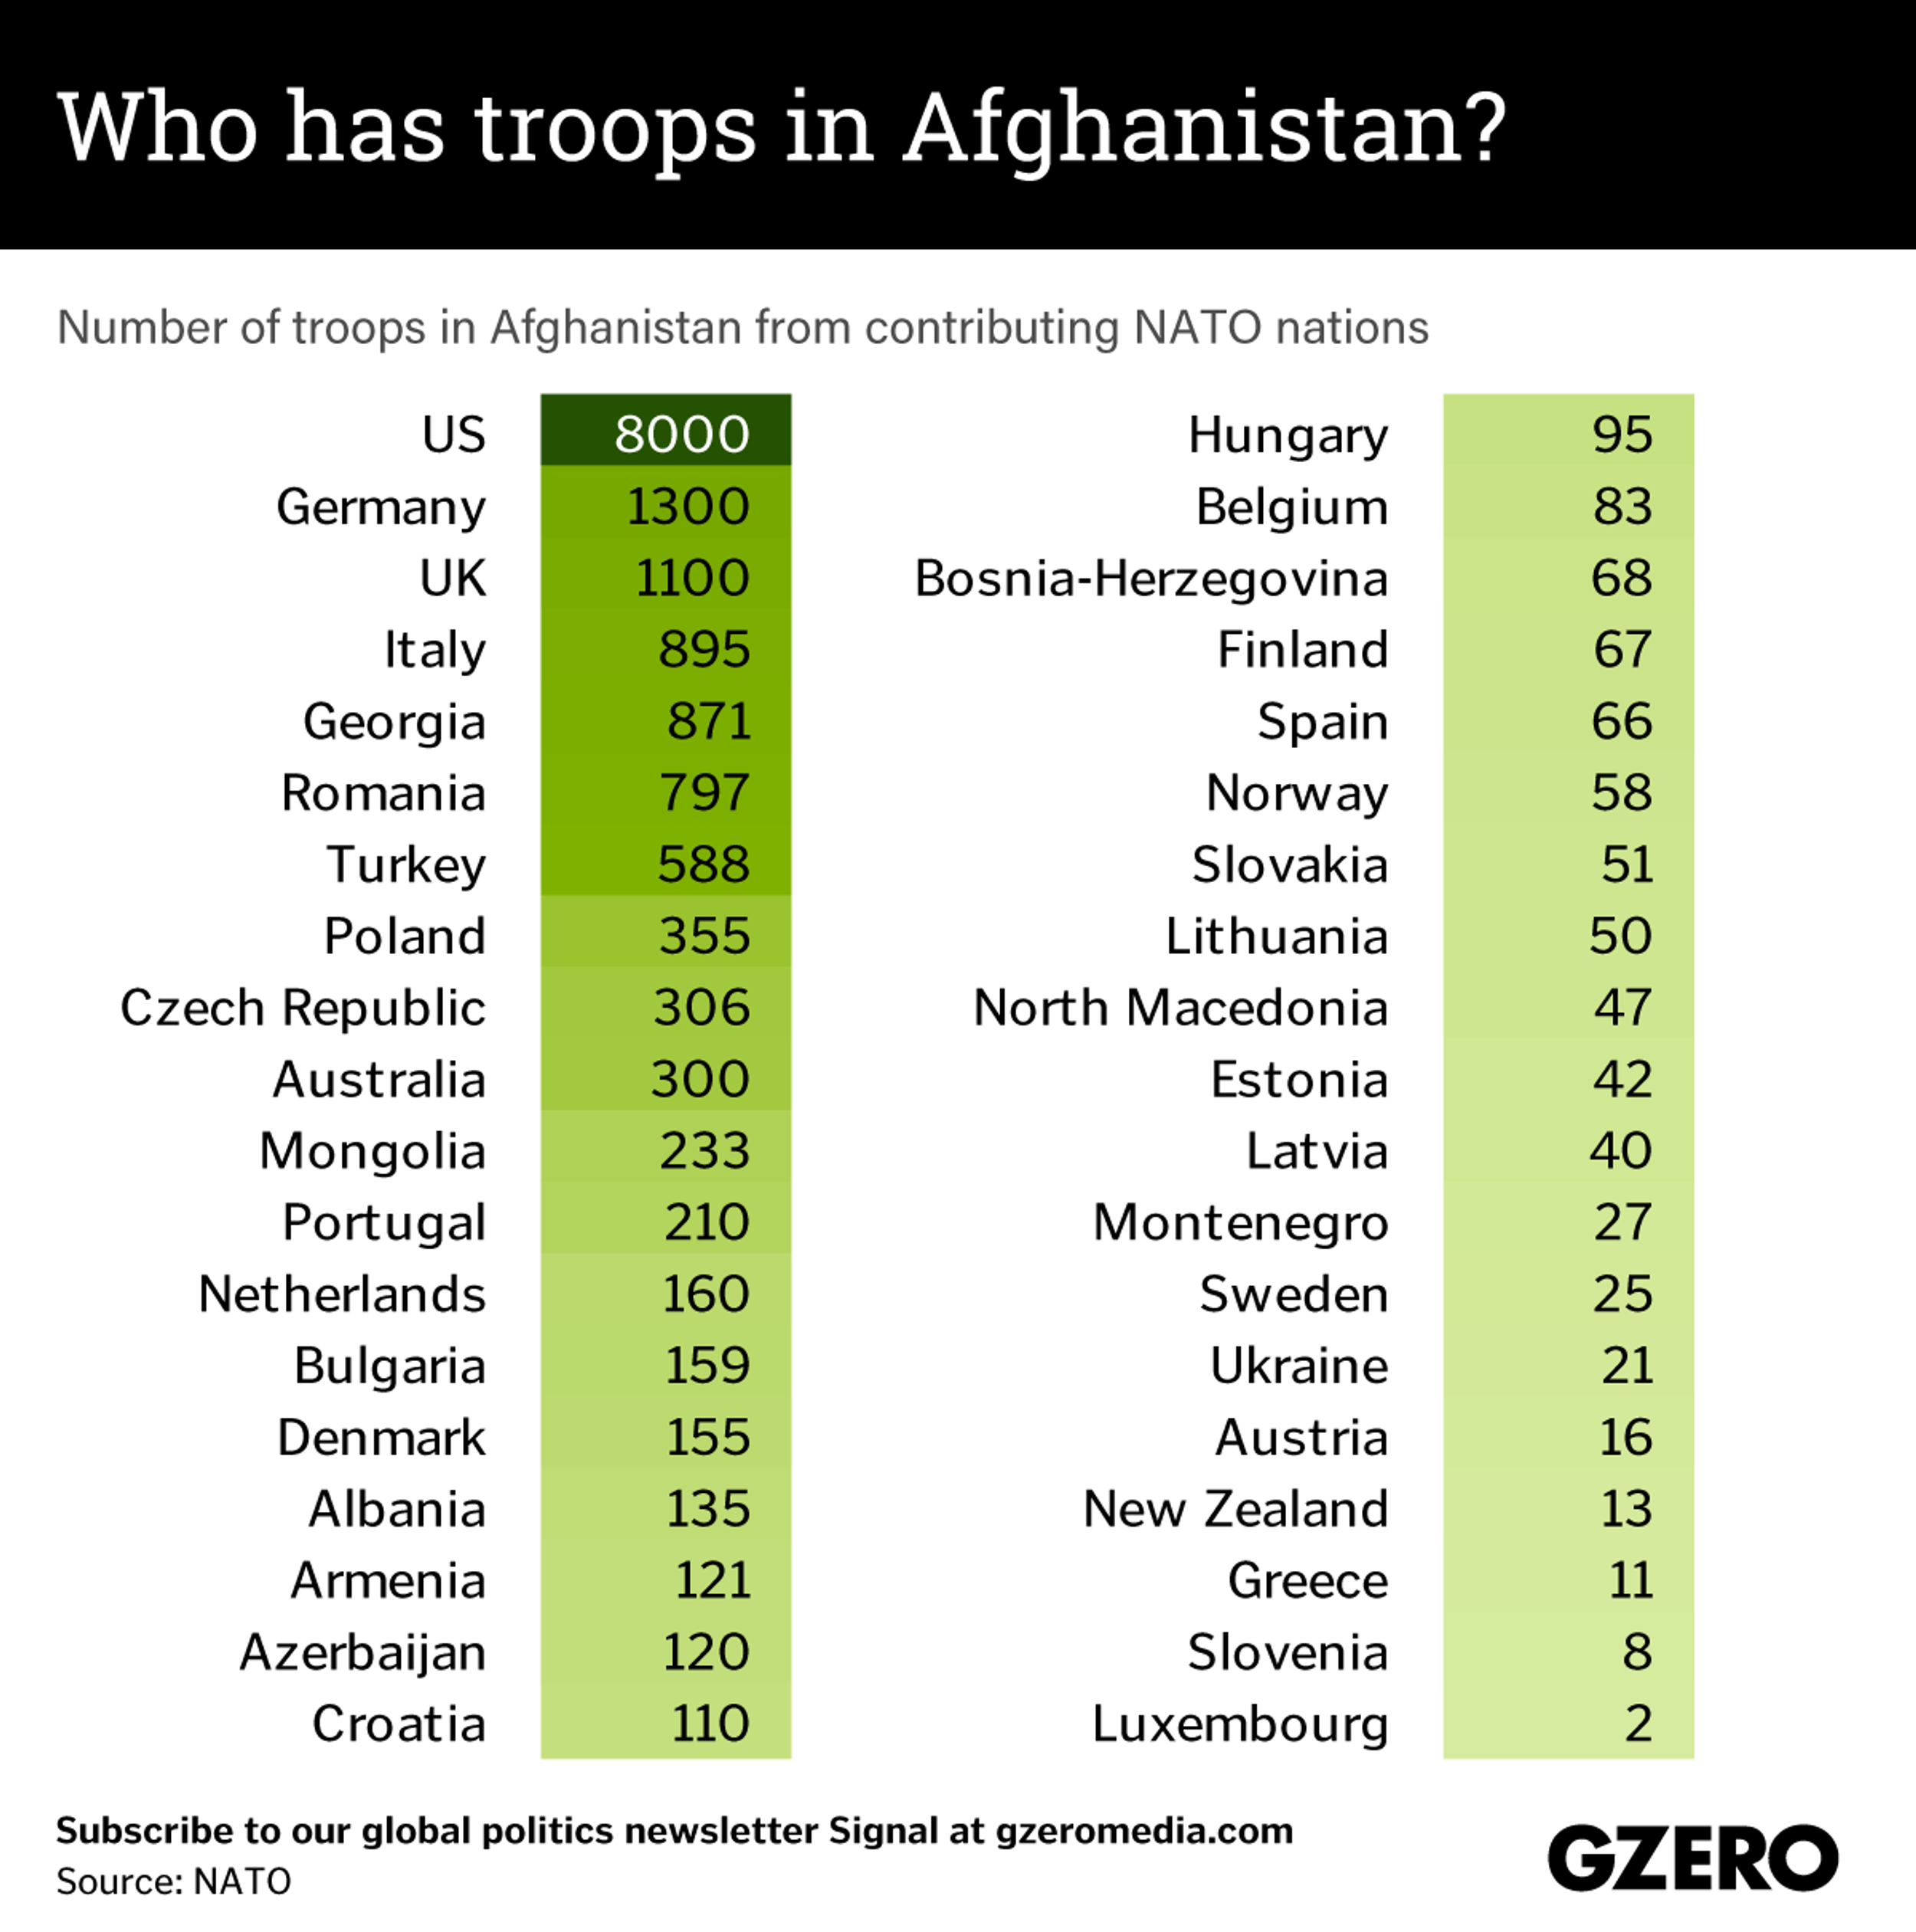 The Graphic Truth: Who has troops in Afghanistan?